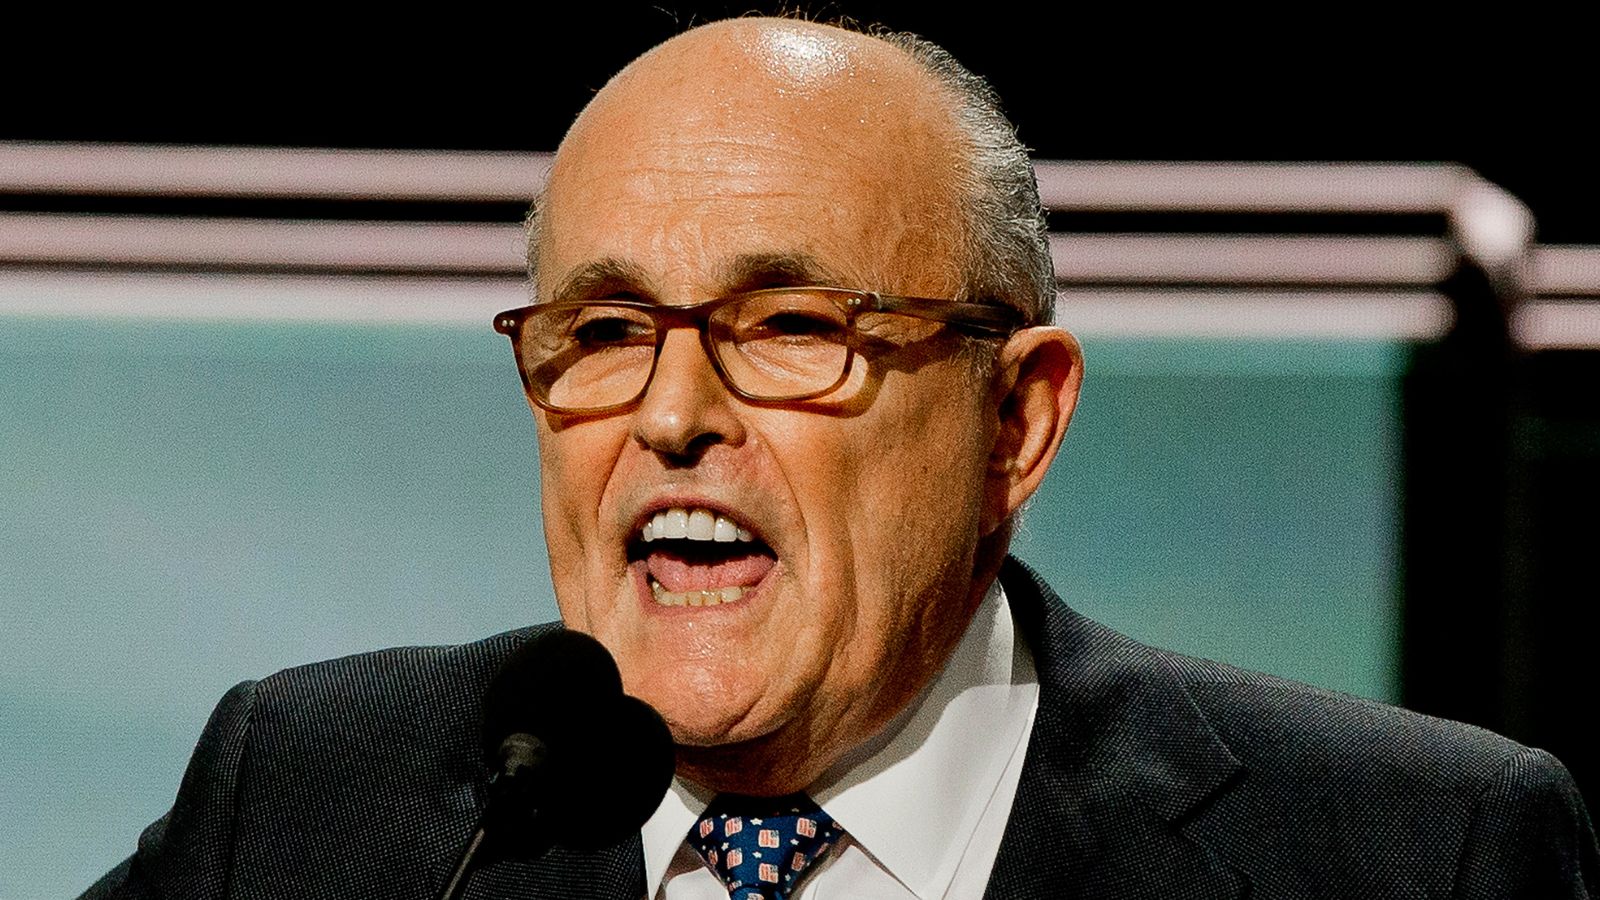 “He Is Being Used as a Russian Pawn”: Rudy Giuliani Is Suing Biden for Defamation Over Past Remarks